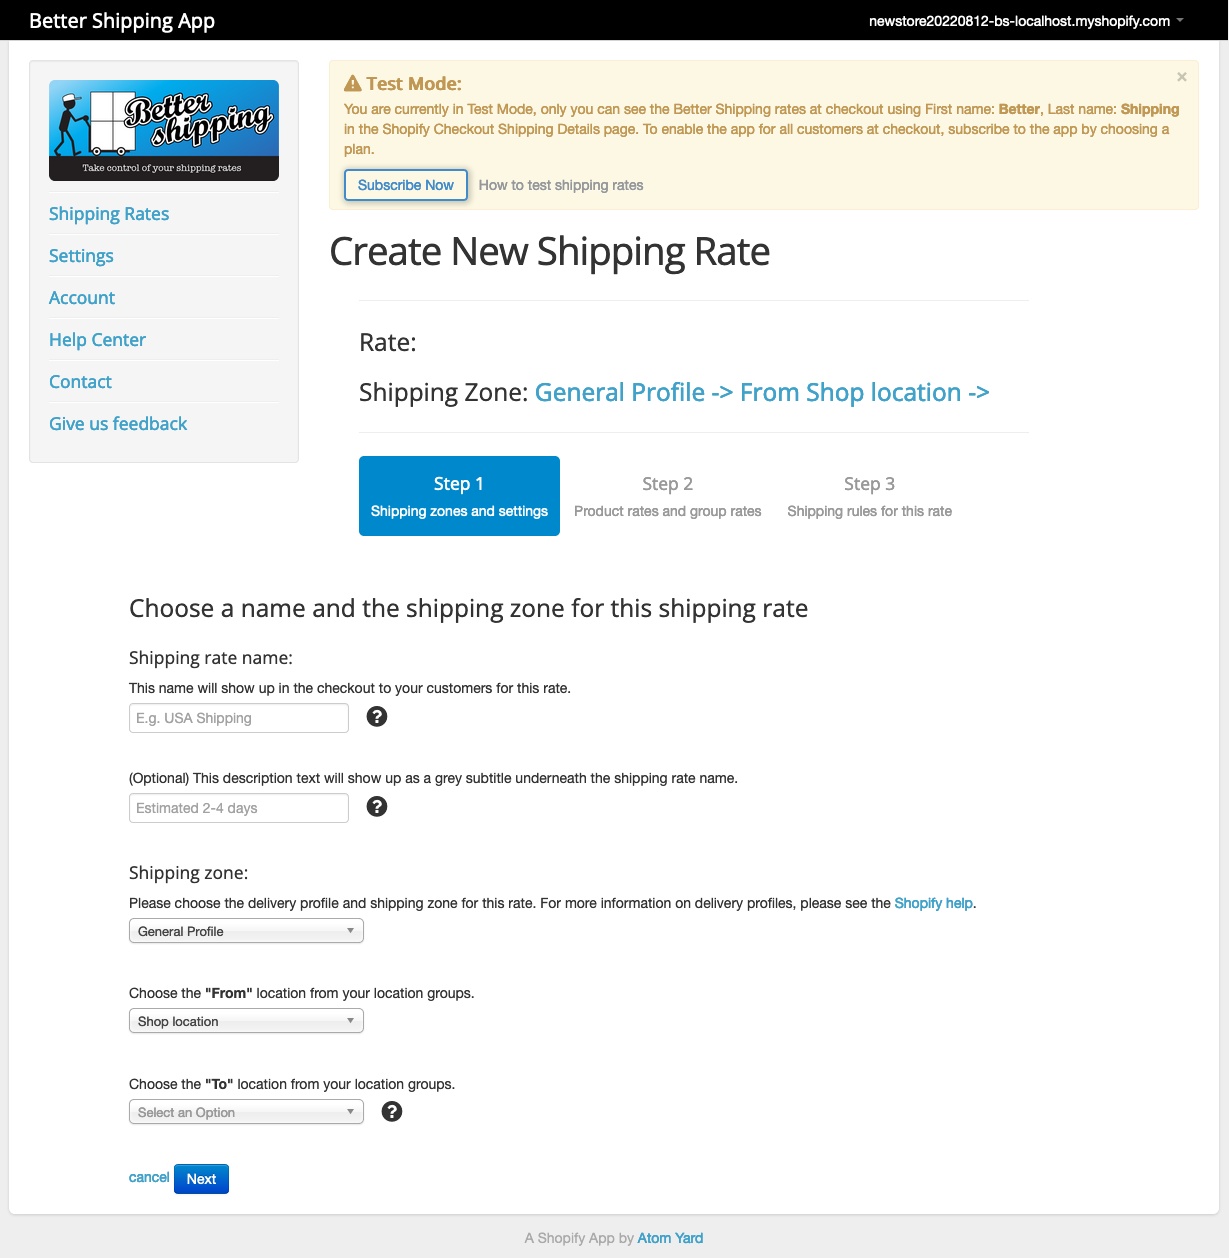 better-shipping-app-for-shopify-step1-name-shipping-zone-blank.png